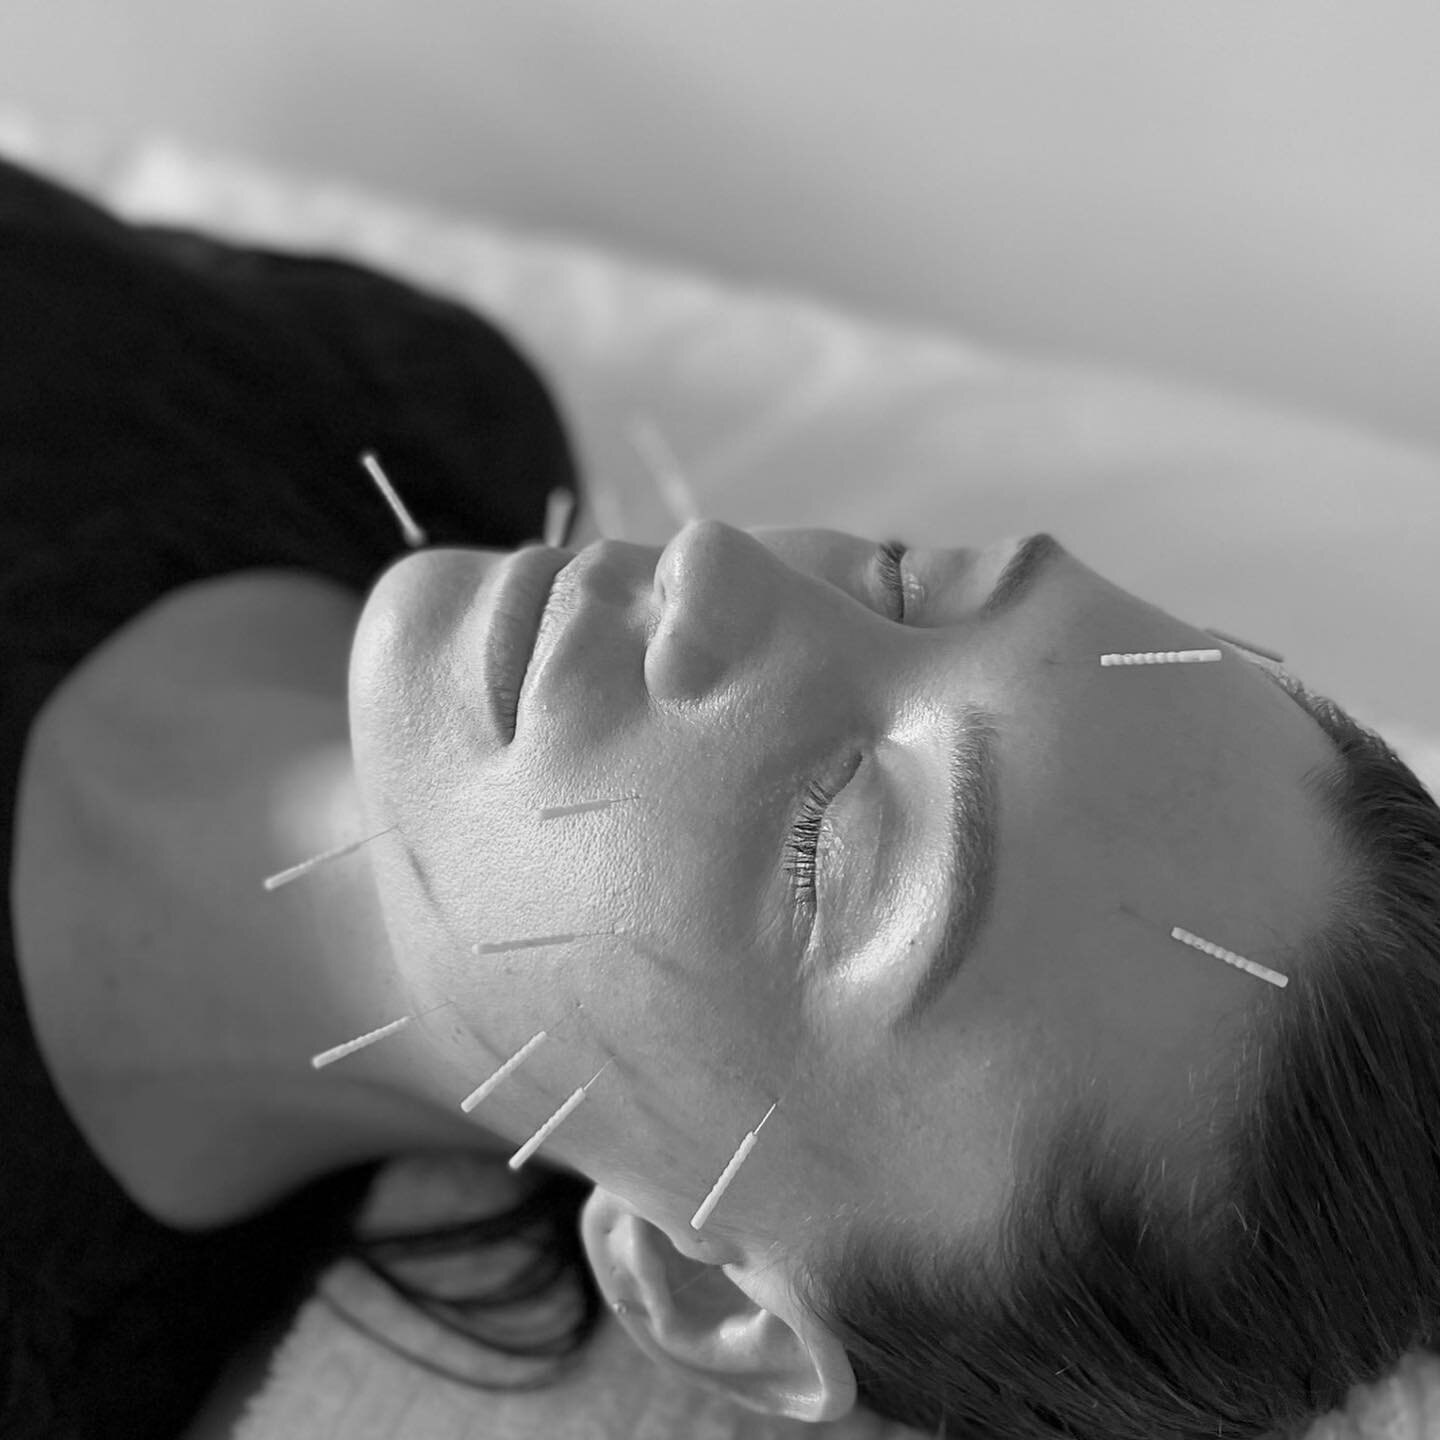 Cosmetic acupuncture results depend not only on your commitment to regular treatments &mdash; but your commitment to self care too. 
Ensuring a diet rich in varied vegetables and good fats, water intake &amp; enjoyable exercise.